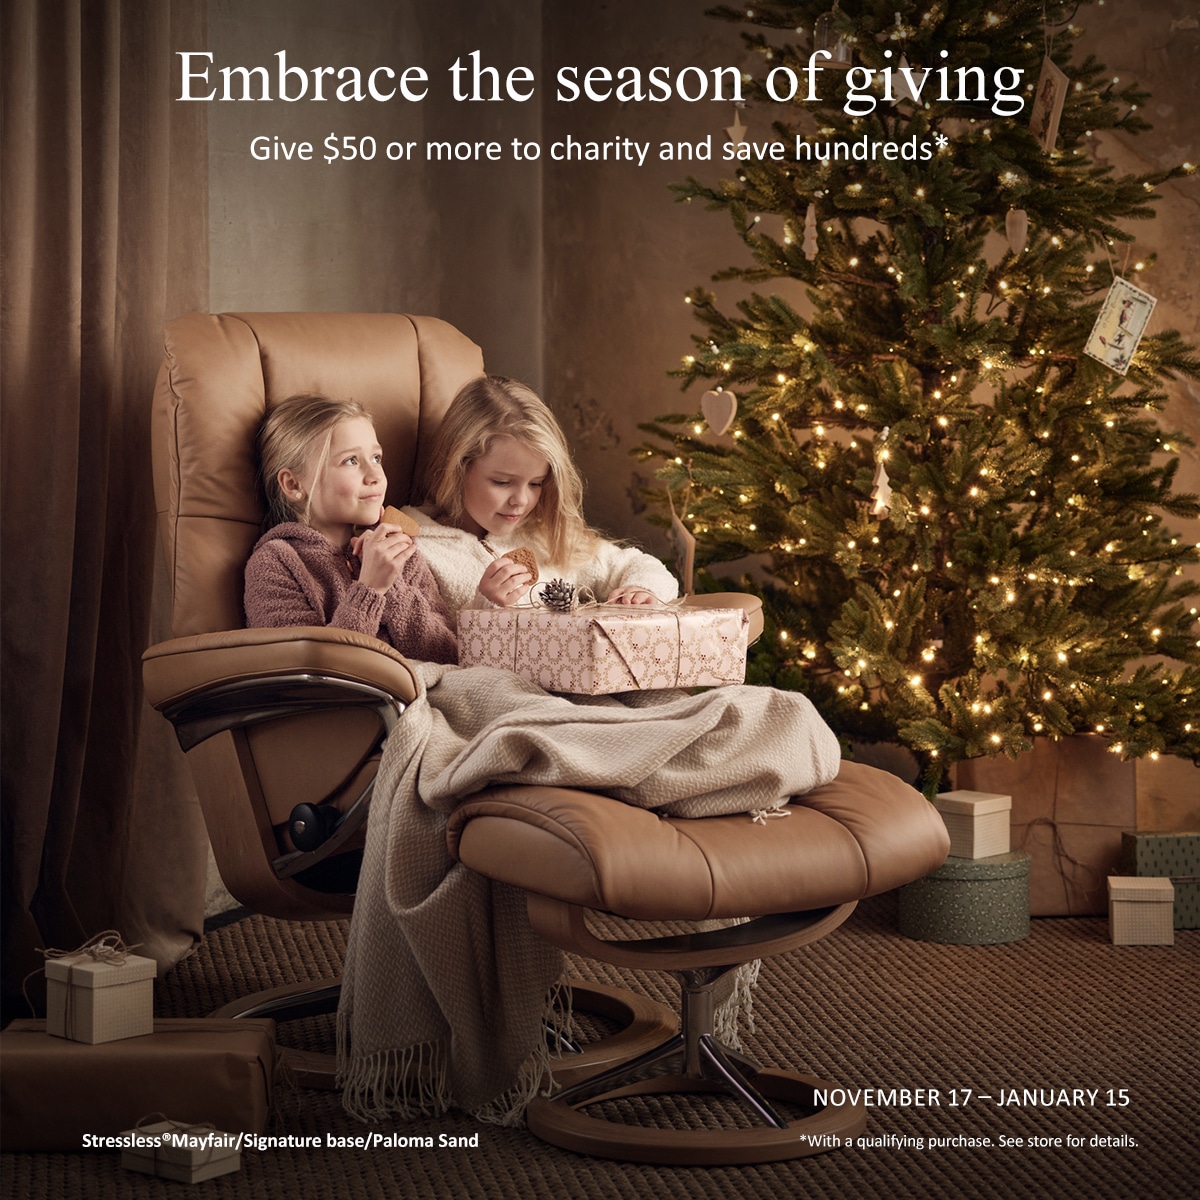 Stressless® Charity Promo - Give $50 to charity and Save Hundreds on Stressless®!